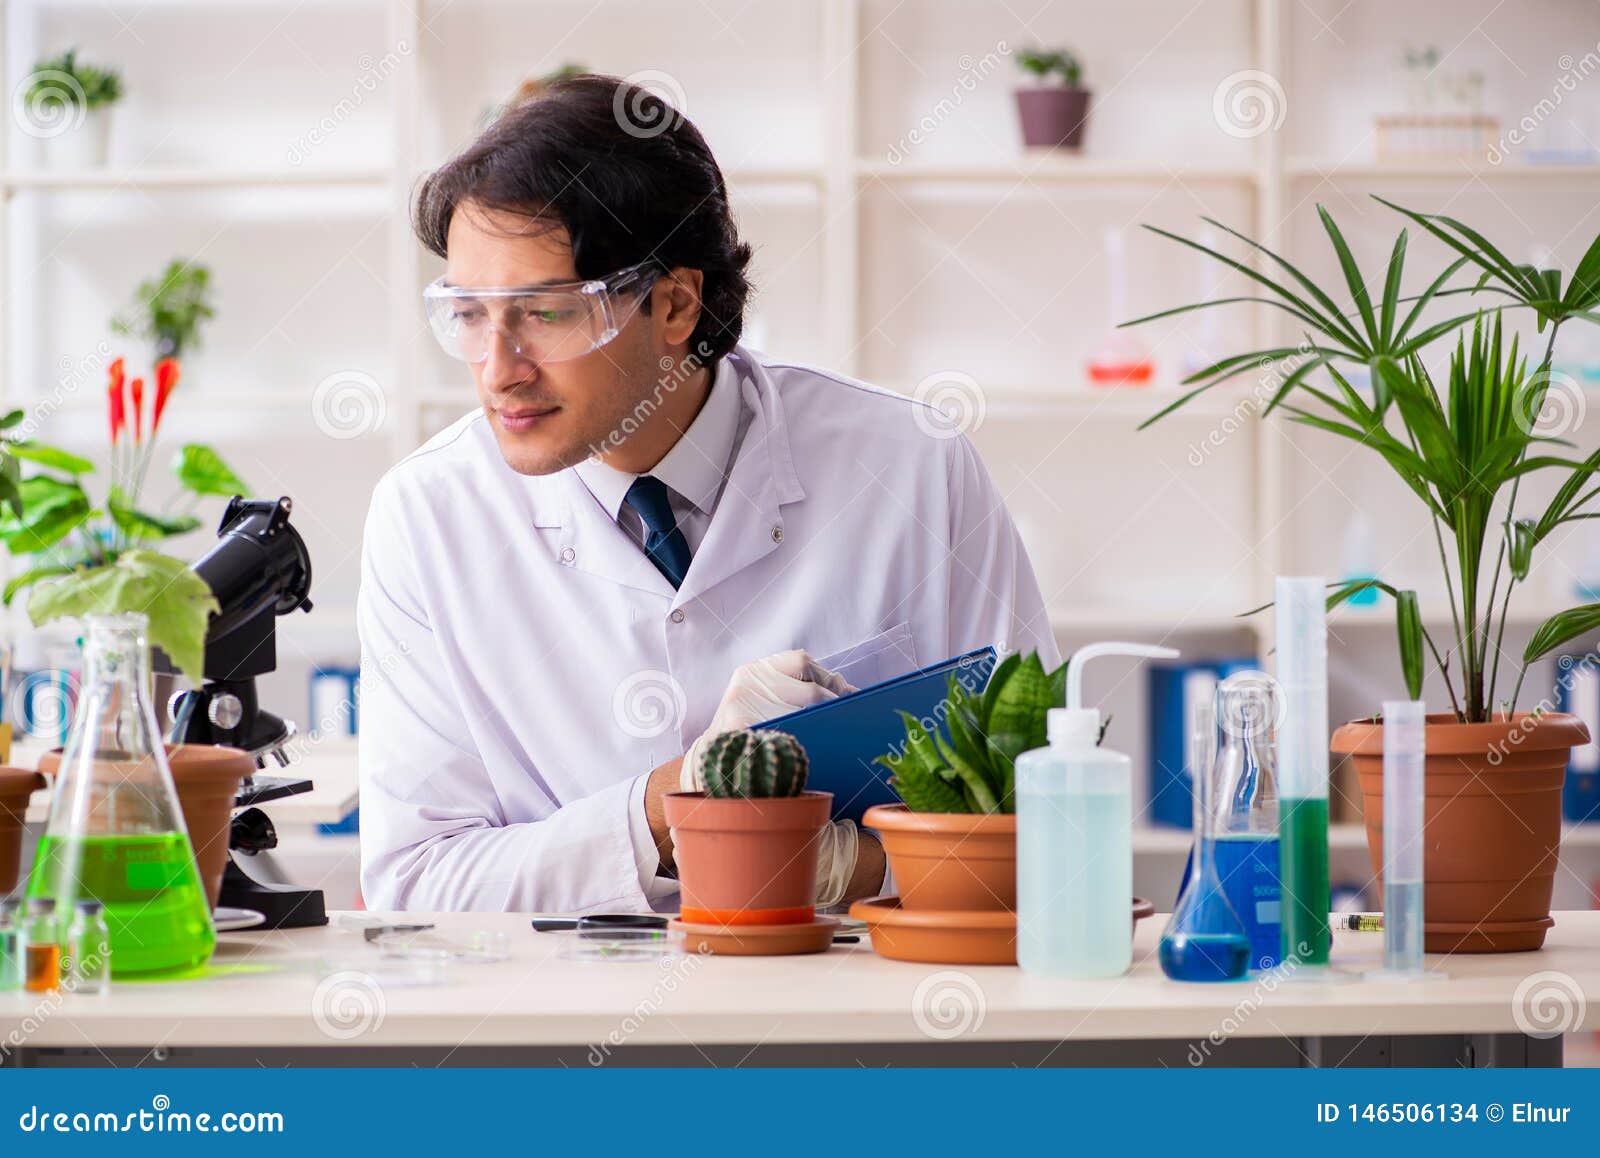 The Biotechnology Chemist Working in Lab Stock Photo Image of